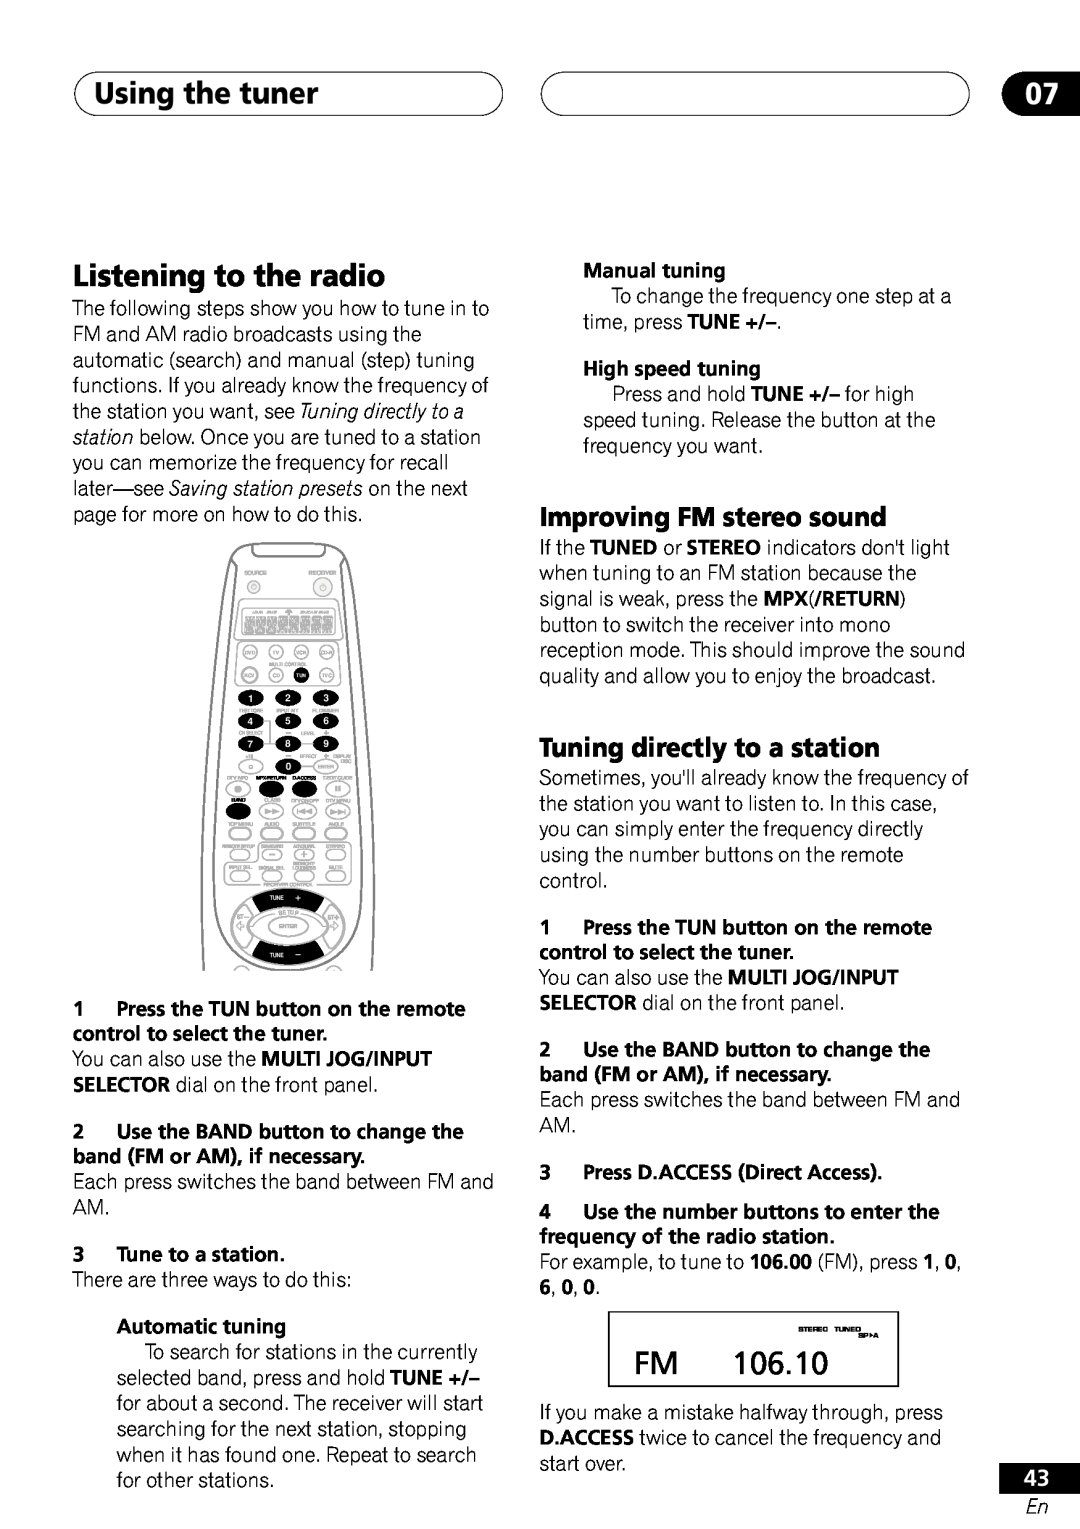 Pioneer VSX-41 manual Using the tuner Listening to the radio, Improving FM stereo sound, Tuning directly to a station 